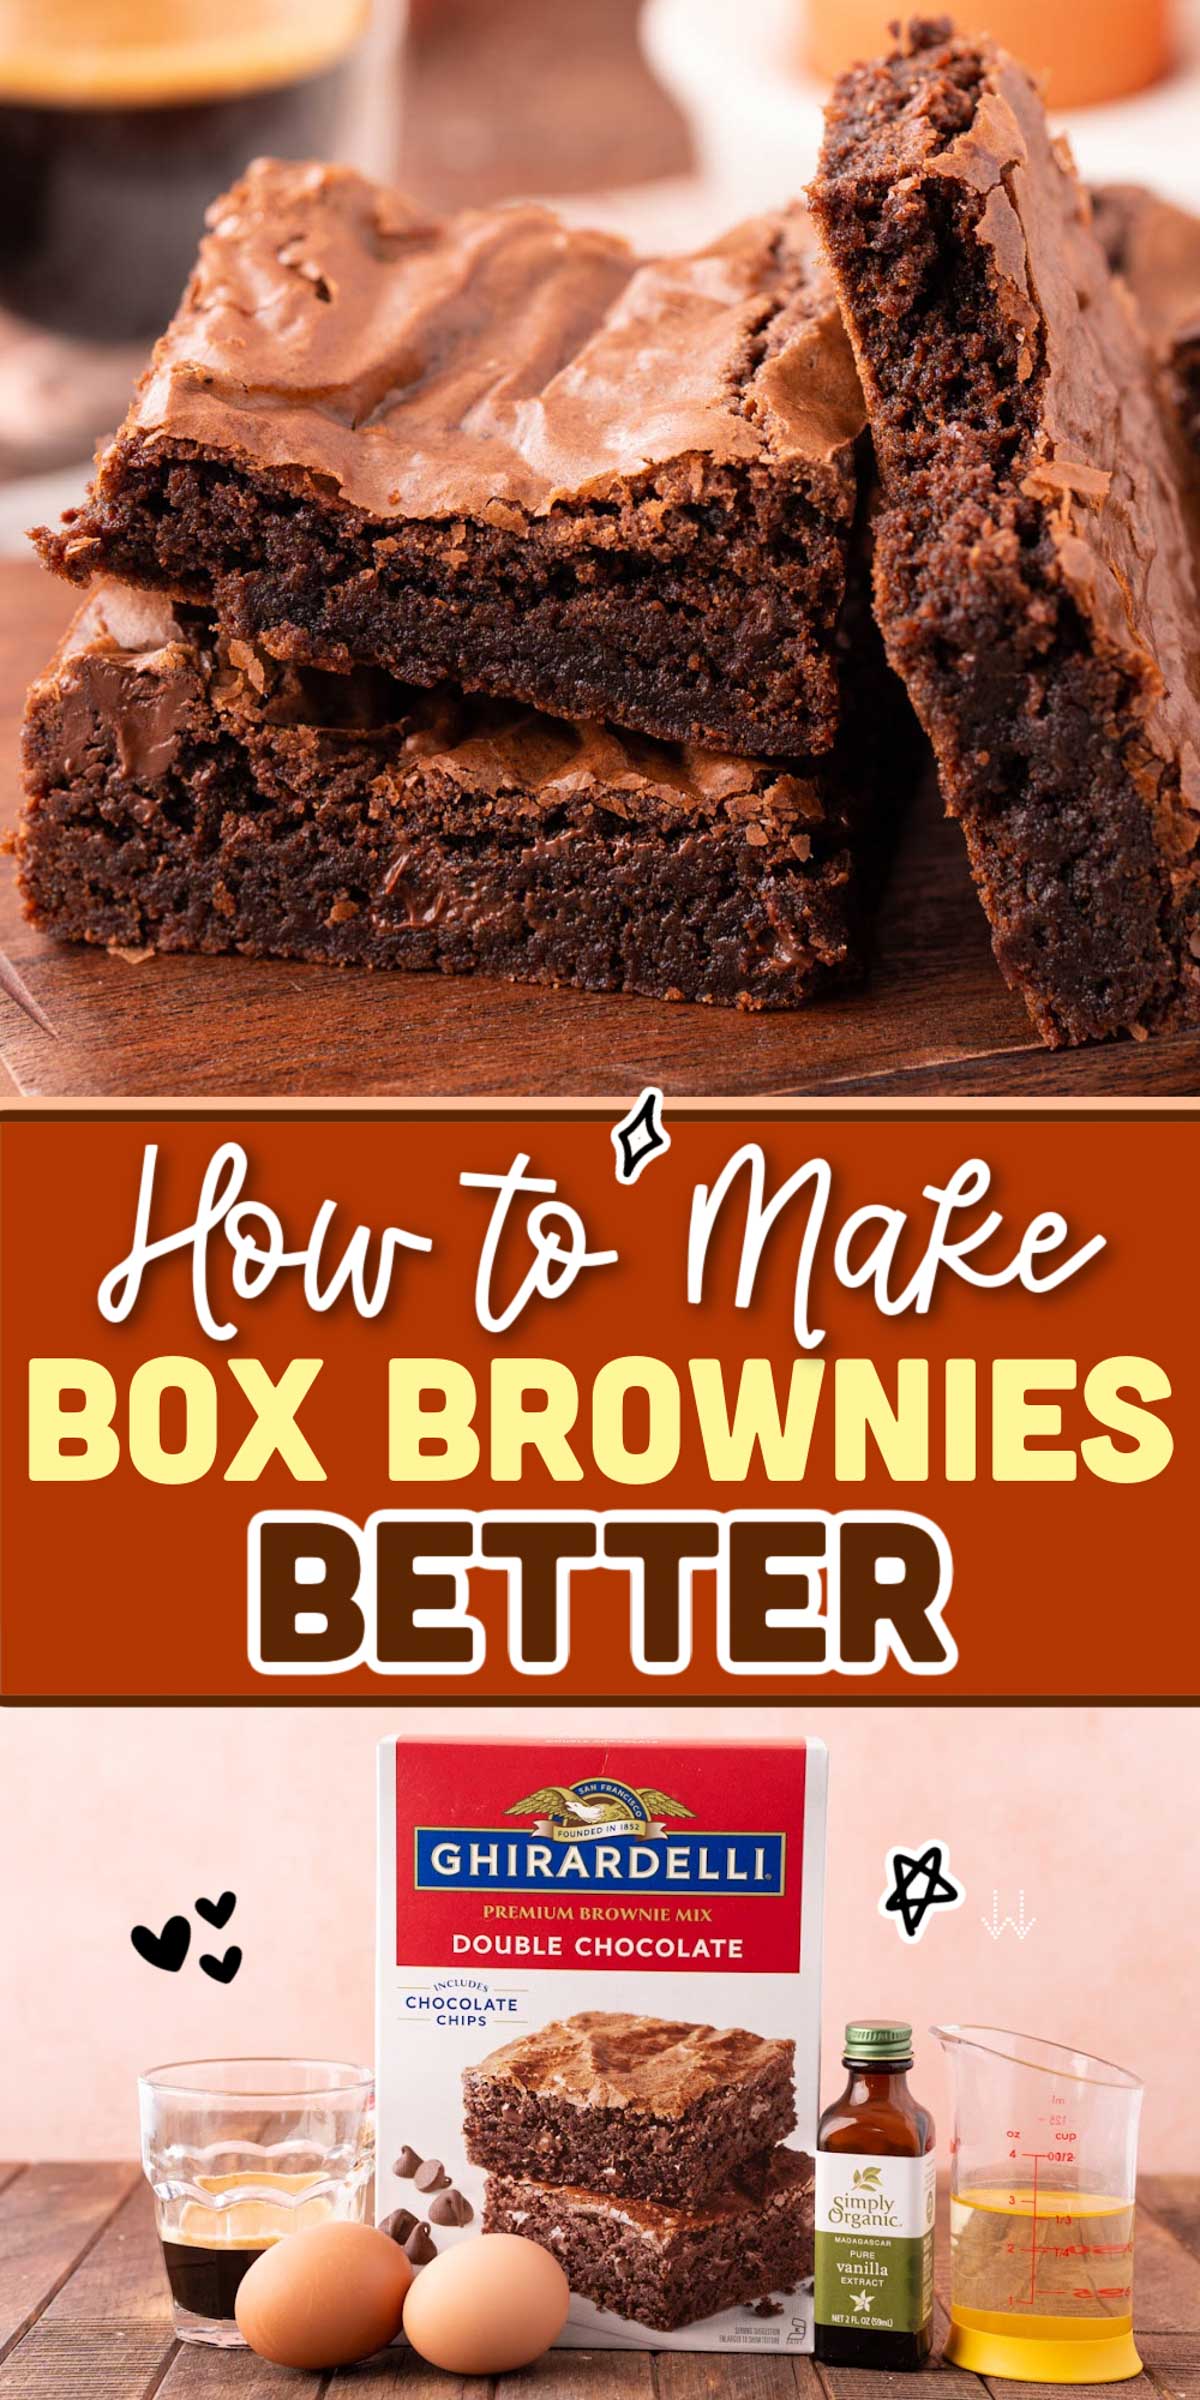 Learn How To Make Box Brownies Better with simple swaps such as egg yolks and brewed coffee and baking them at a lower heat! These effortless tricks will have you falling in love with box mix brownies all over again! via @sugarandsoulco